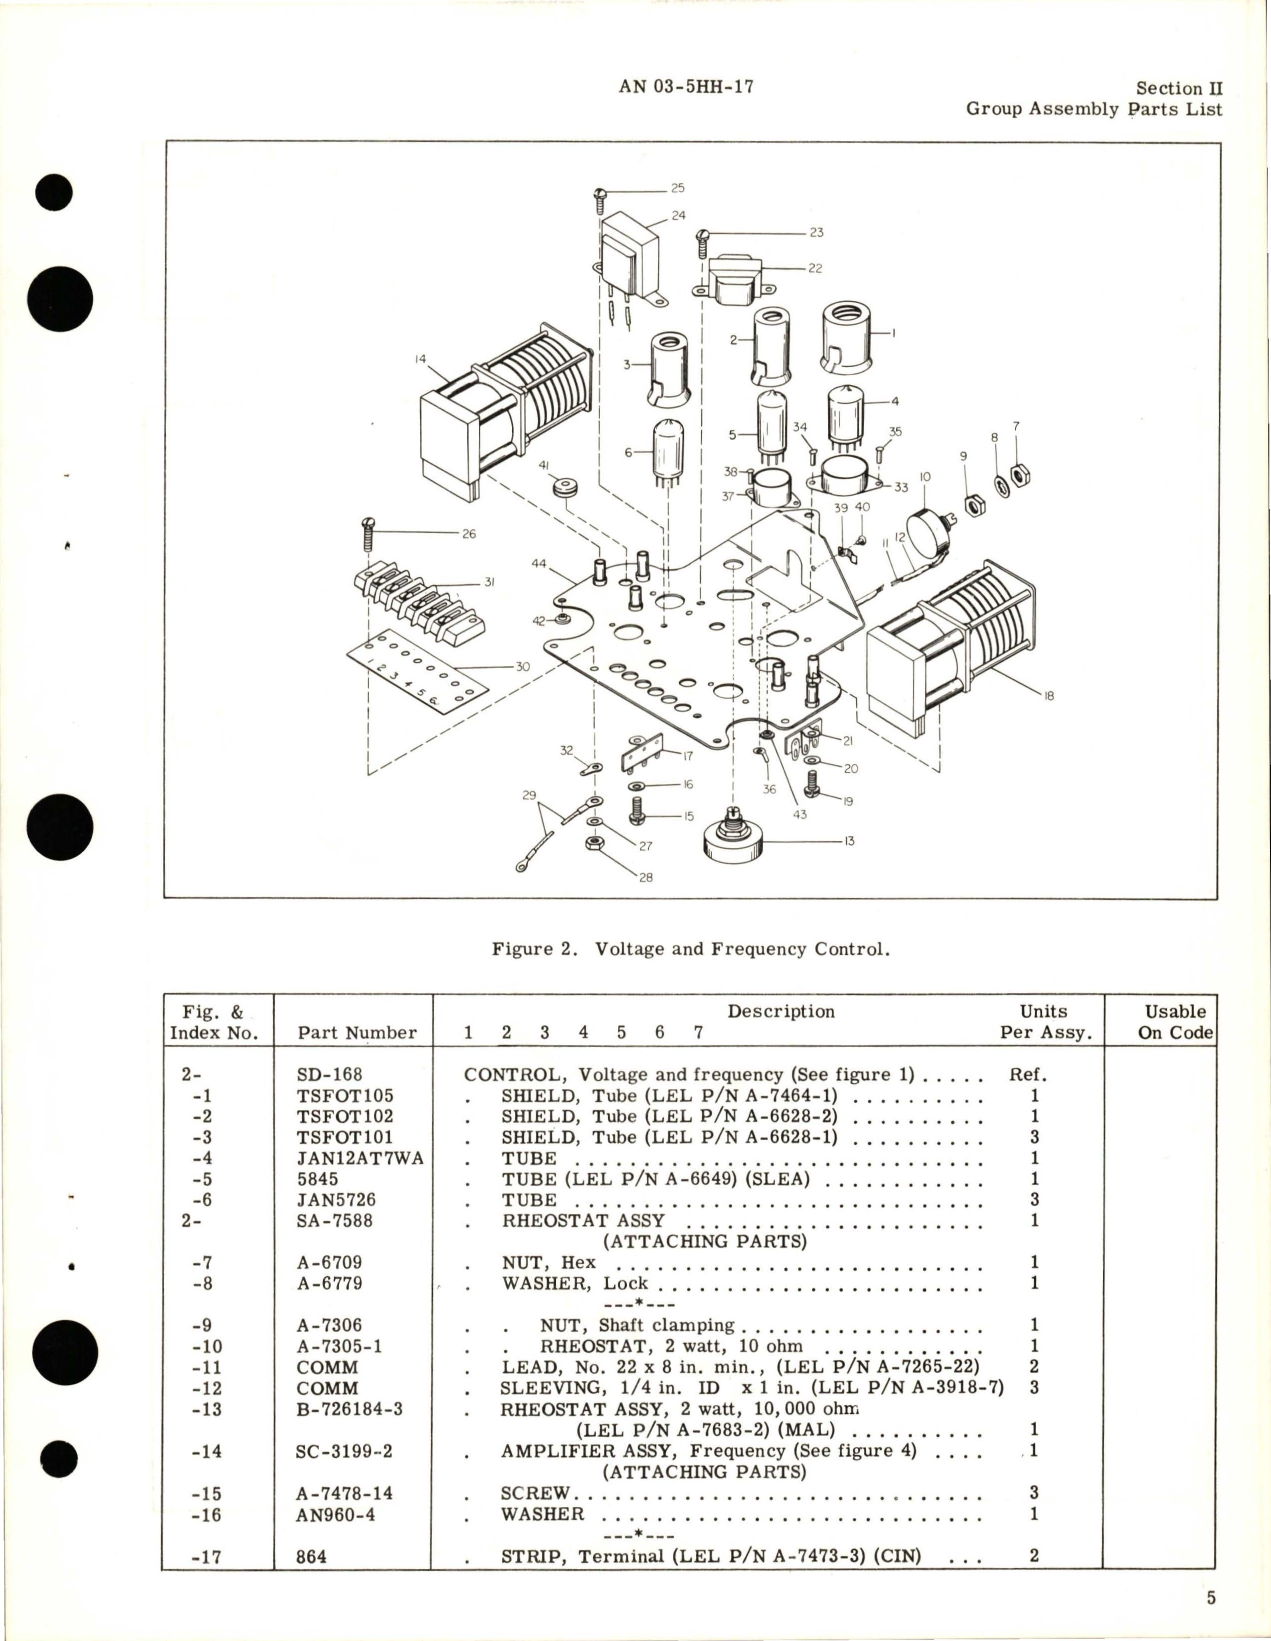 Sample page 9 from AirCorps Library document: Illustrated Parts Breakdown for Inverter - Parts SE-5-1 and SE-5-2